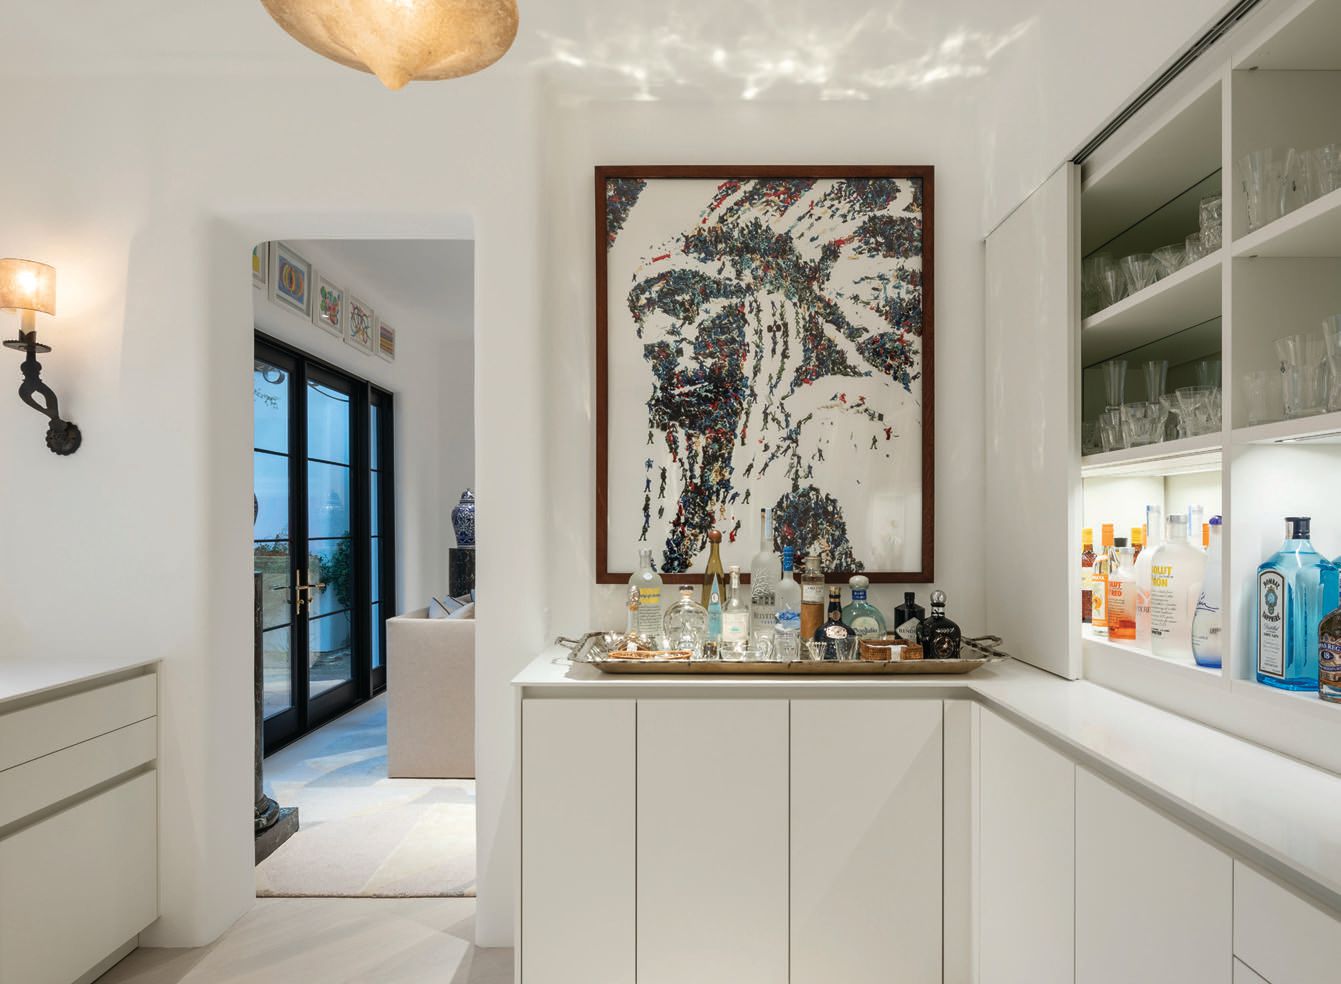 Equipped with cabinetry by Leicht, the bar area highlights several unique pieces, such as sconces from Formations, an antique alabaster pendant purchased in Paris at the Puces and a photograph by Vik Muniz PHOTOGRAPHED BY JOE COTITTA